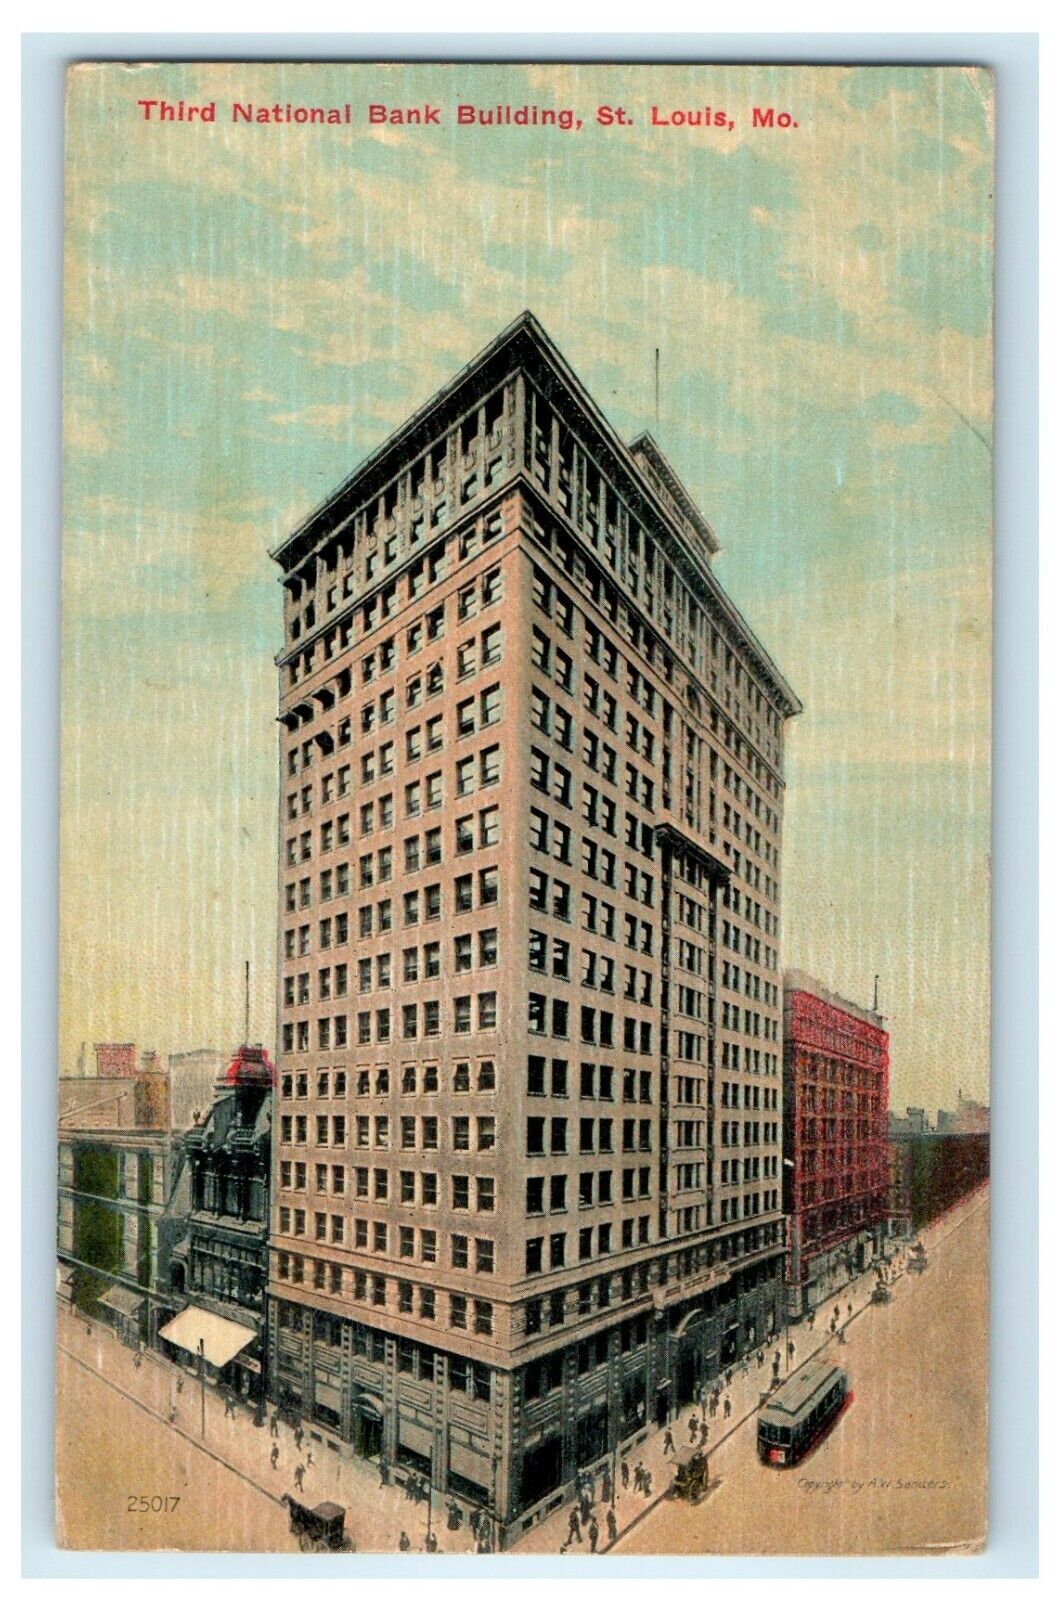 1911 Third National Bank Building St. Louis Missouri MO Posted Antique Postcard